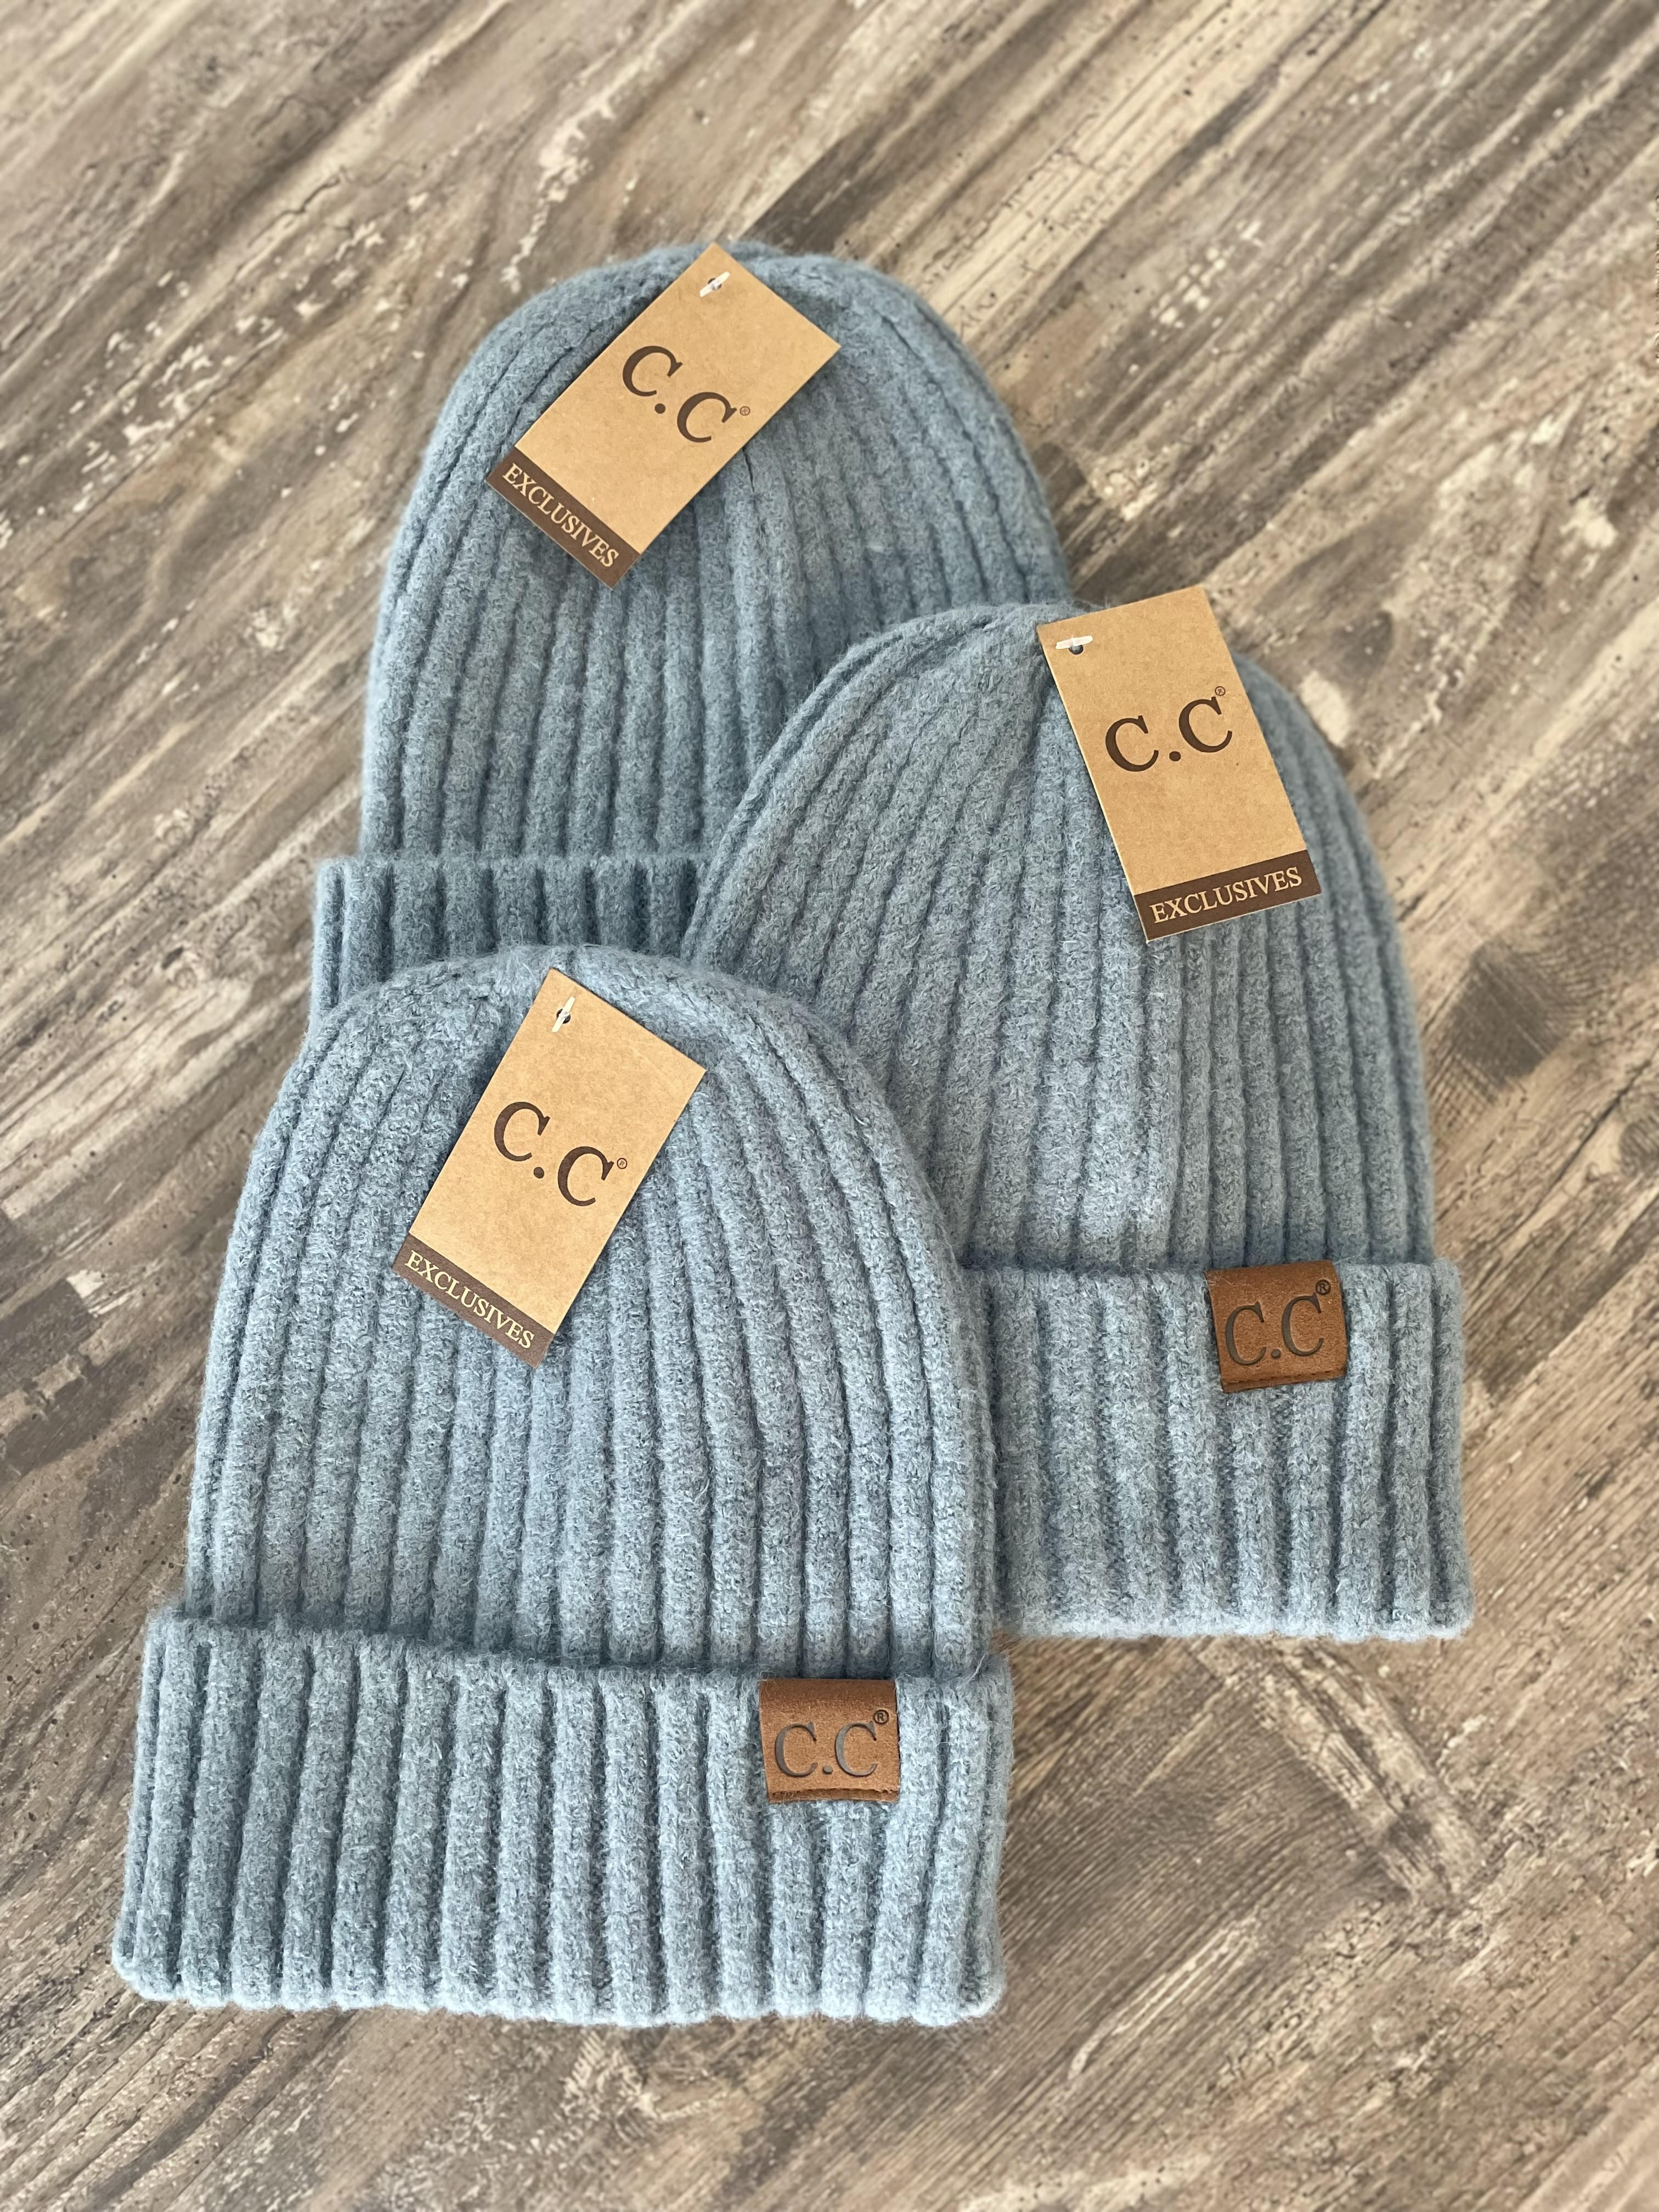 C.C. Beanie Hats in Smokey Blue and Black